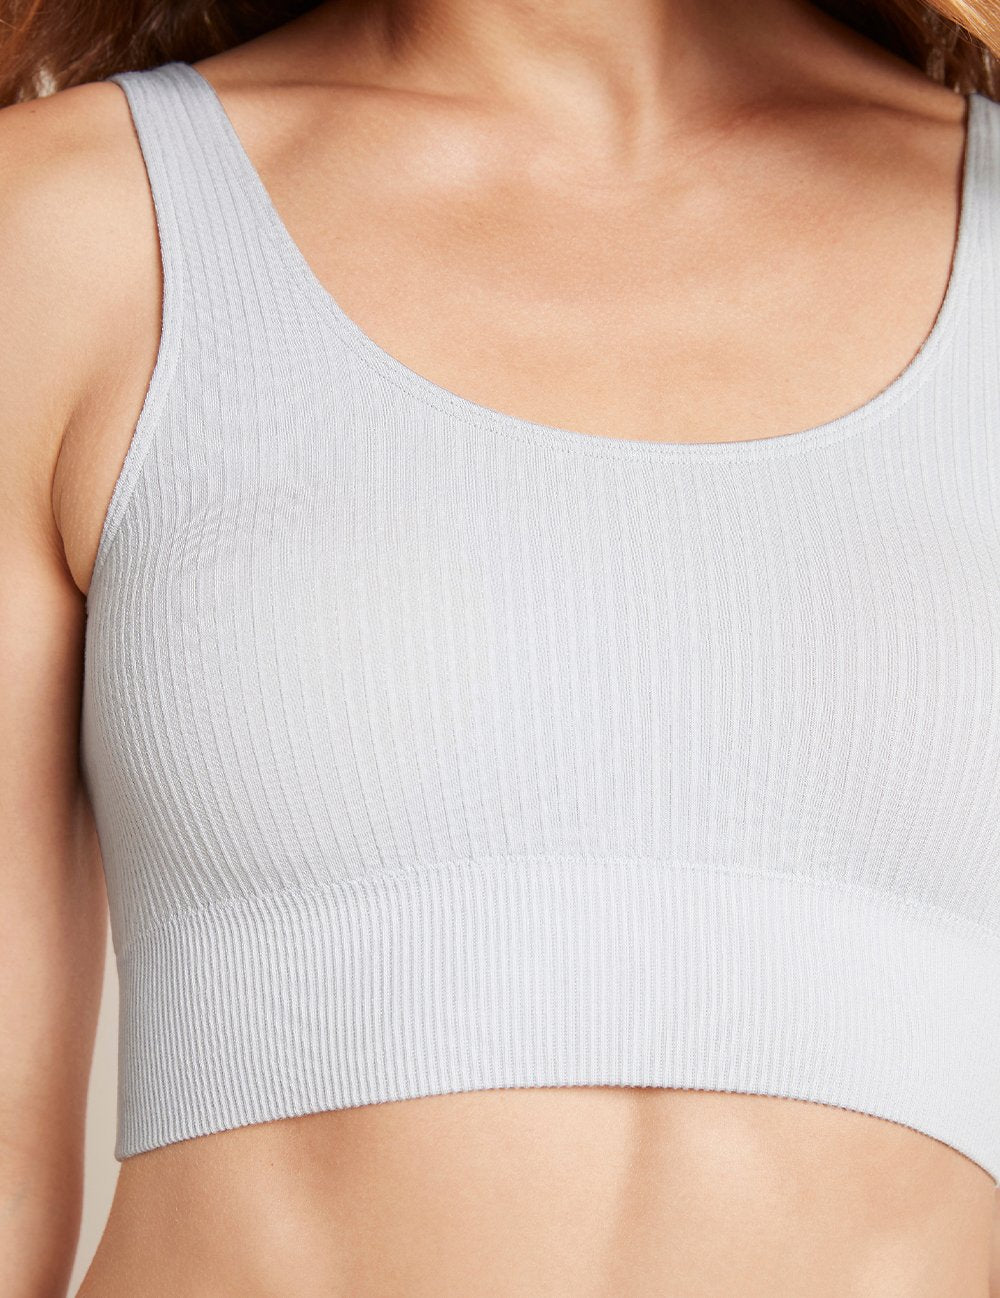 White Ribbed Seamless Crop Top Bralette